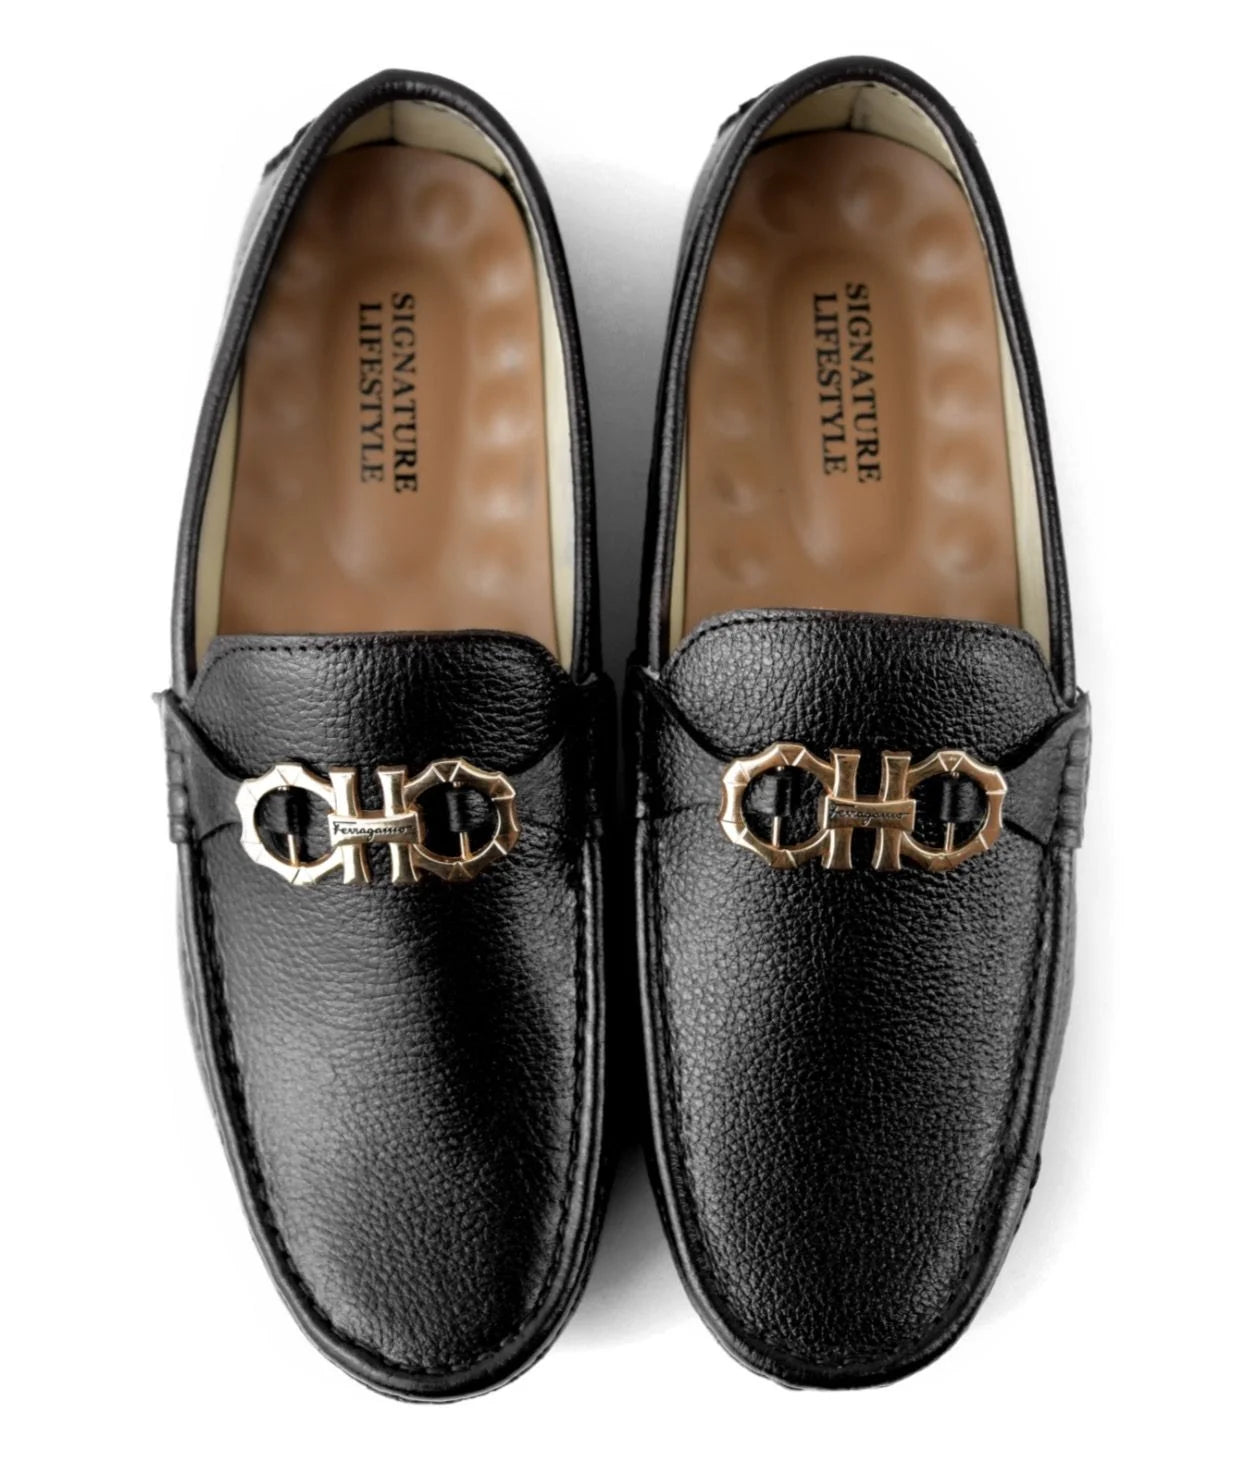 Black Leather Classic Loafer